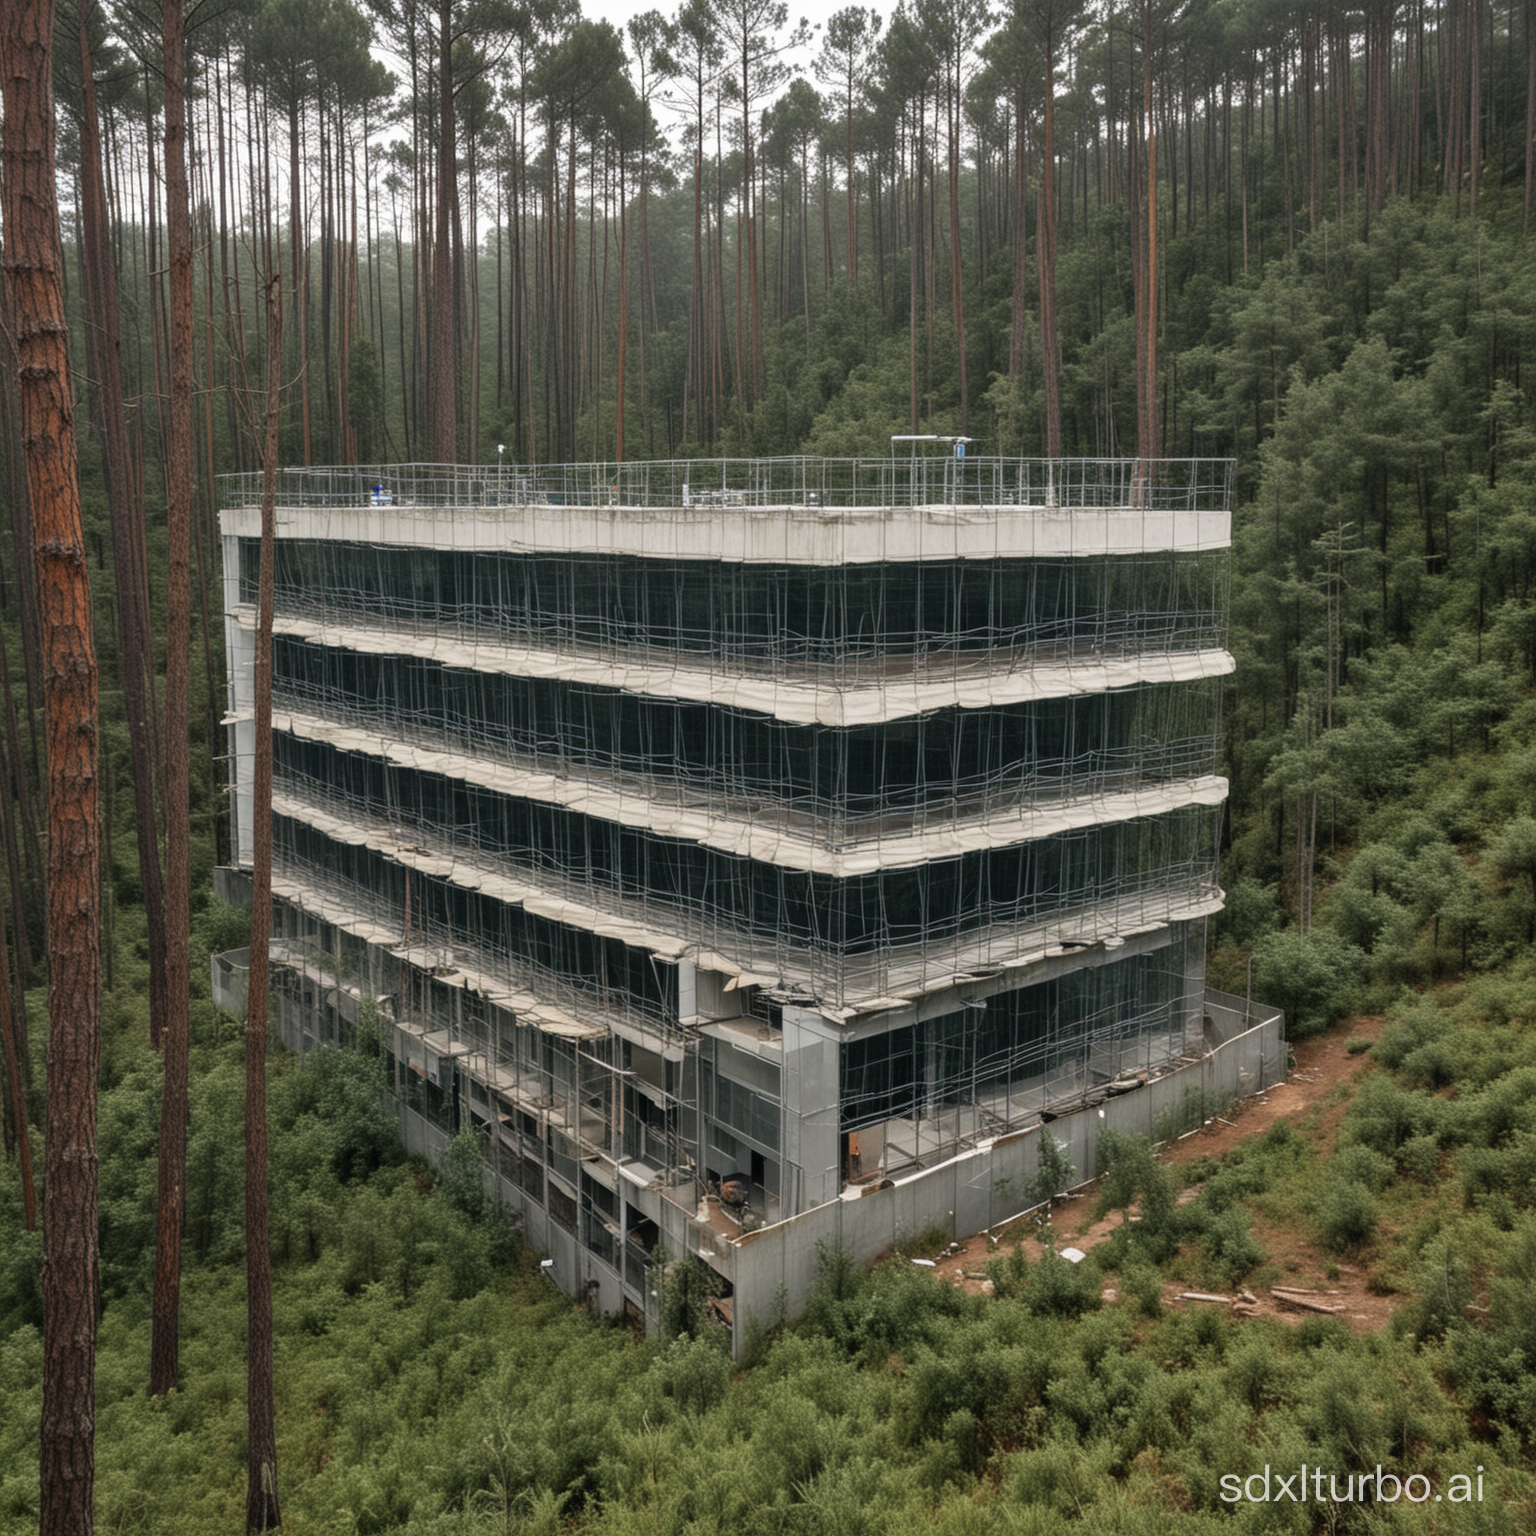 A six-storey biggest laboratory in Paduri, protected by wire fences in the middle of a pine forest